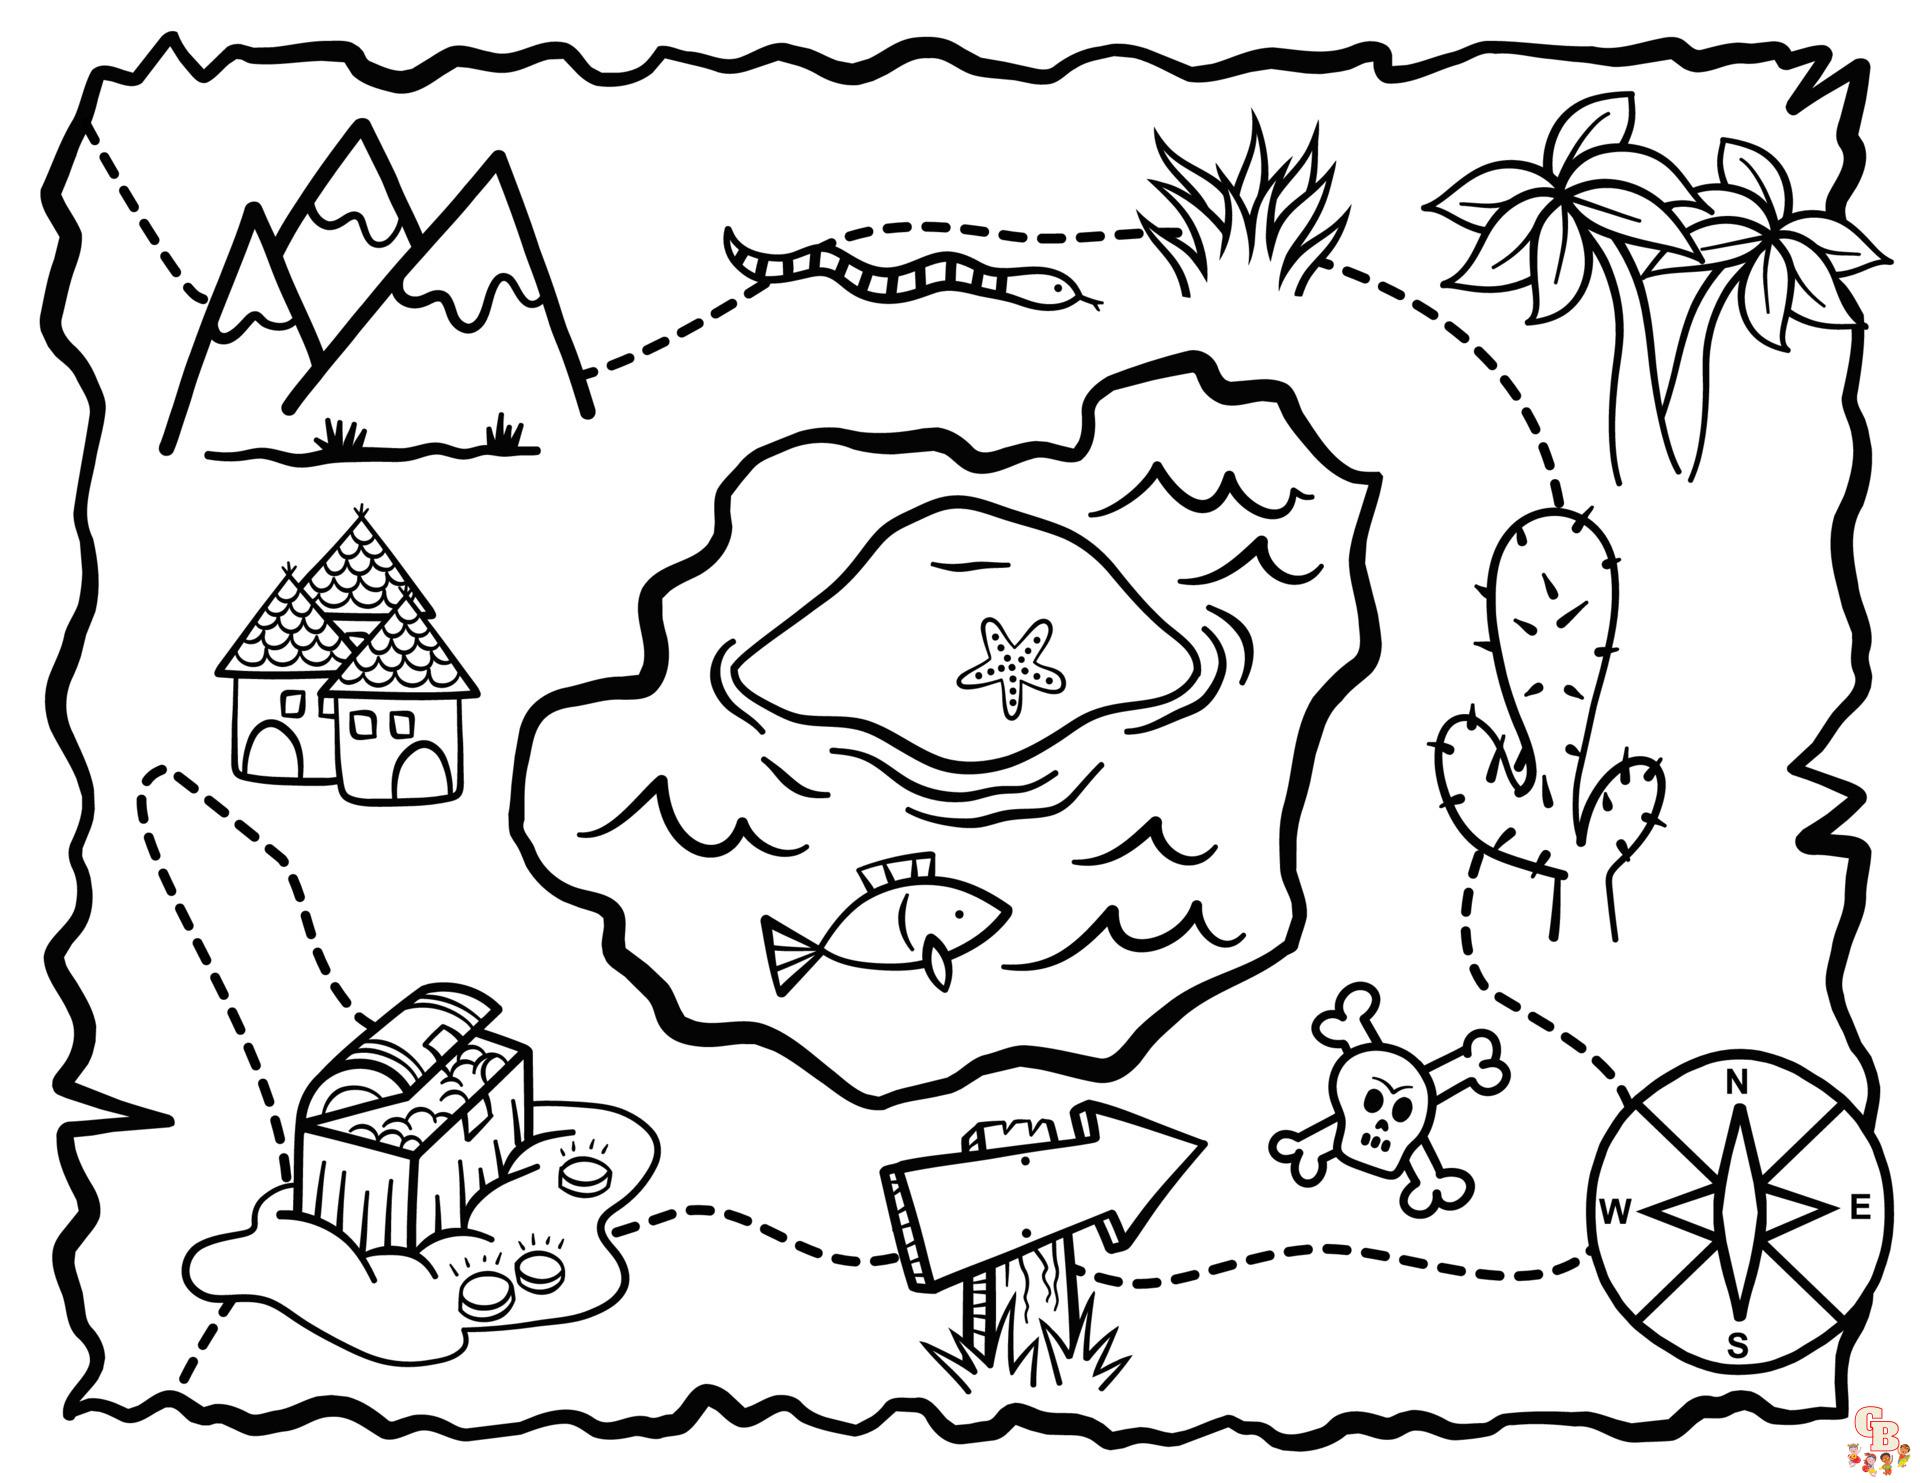 Fun and creative treasure map coloring pages for kids and adults alike